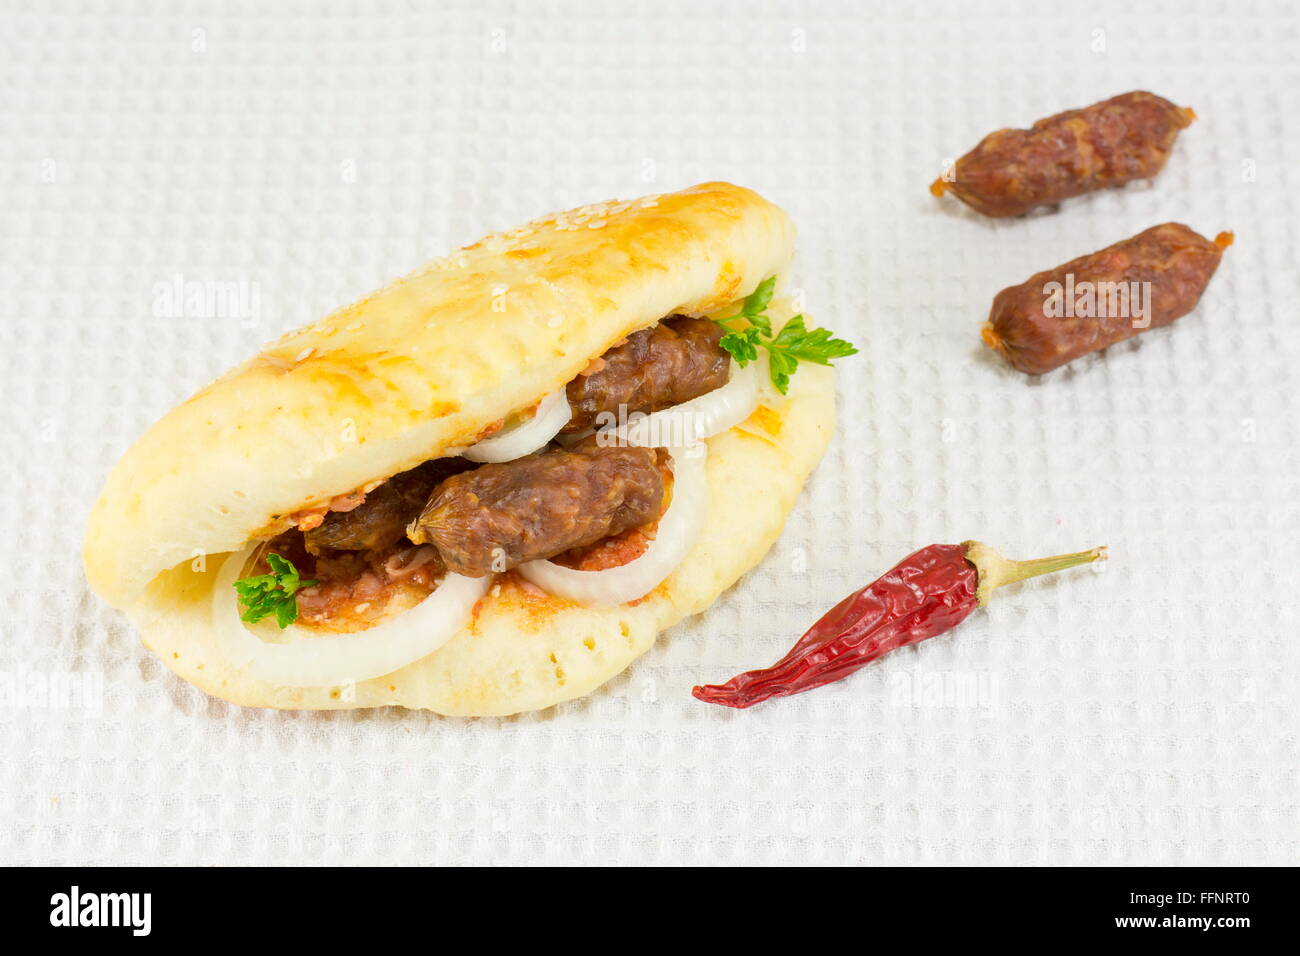 Spicy gourmet sandwich with special small sausages on white tablecloth Stock Photo